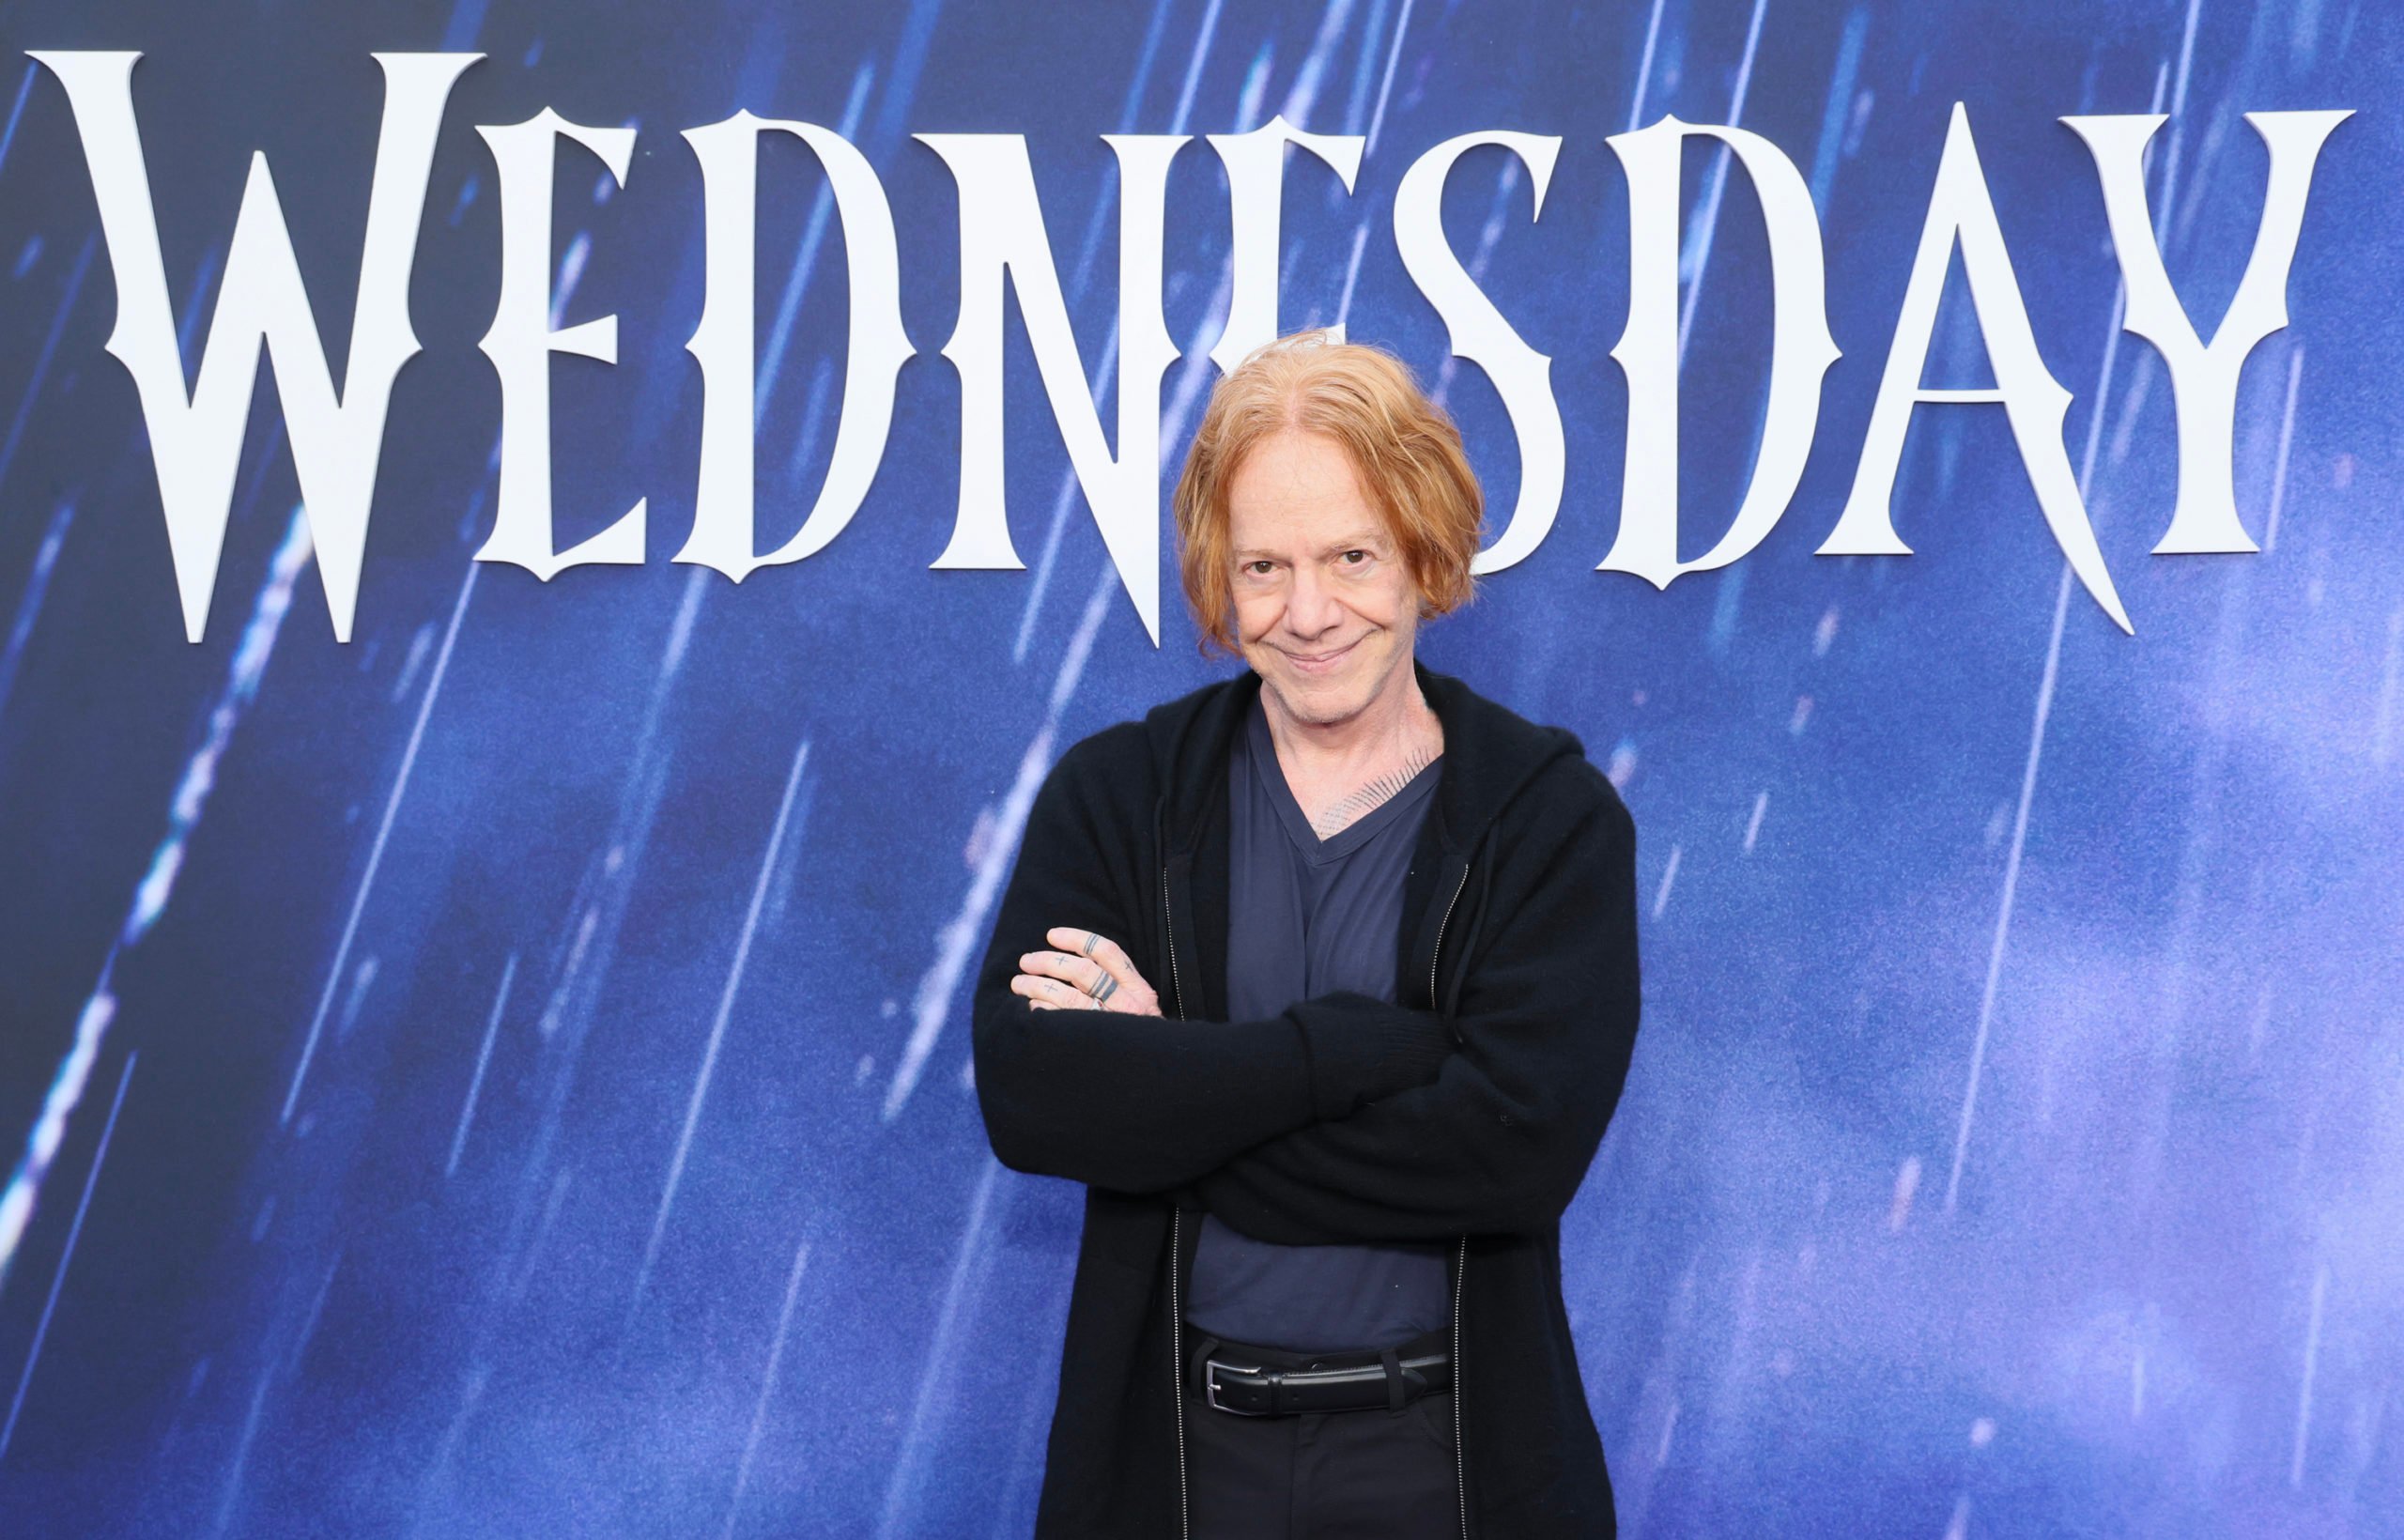 HOLLYWOOD, CALIFORNIA - APRIL 29: Danny Elfman attends Netflix's "Wednesday" ATAS official event photo call at Hollywood Forever on April 29, 2023 in Hollywood, California. (Photo by Rodin Eckenroth/FilmMagic)